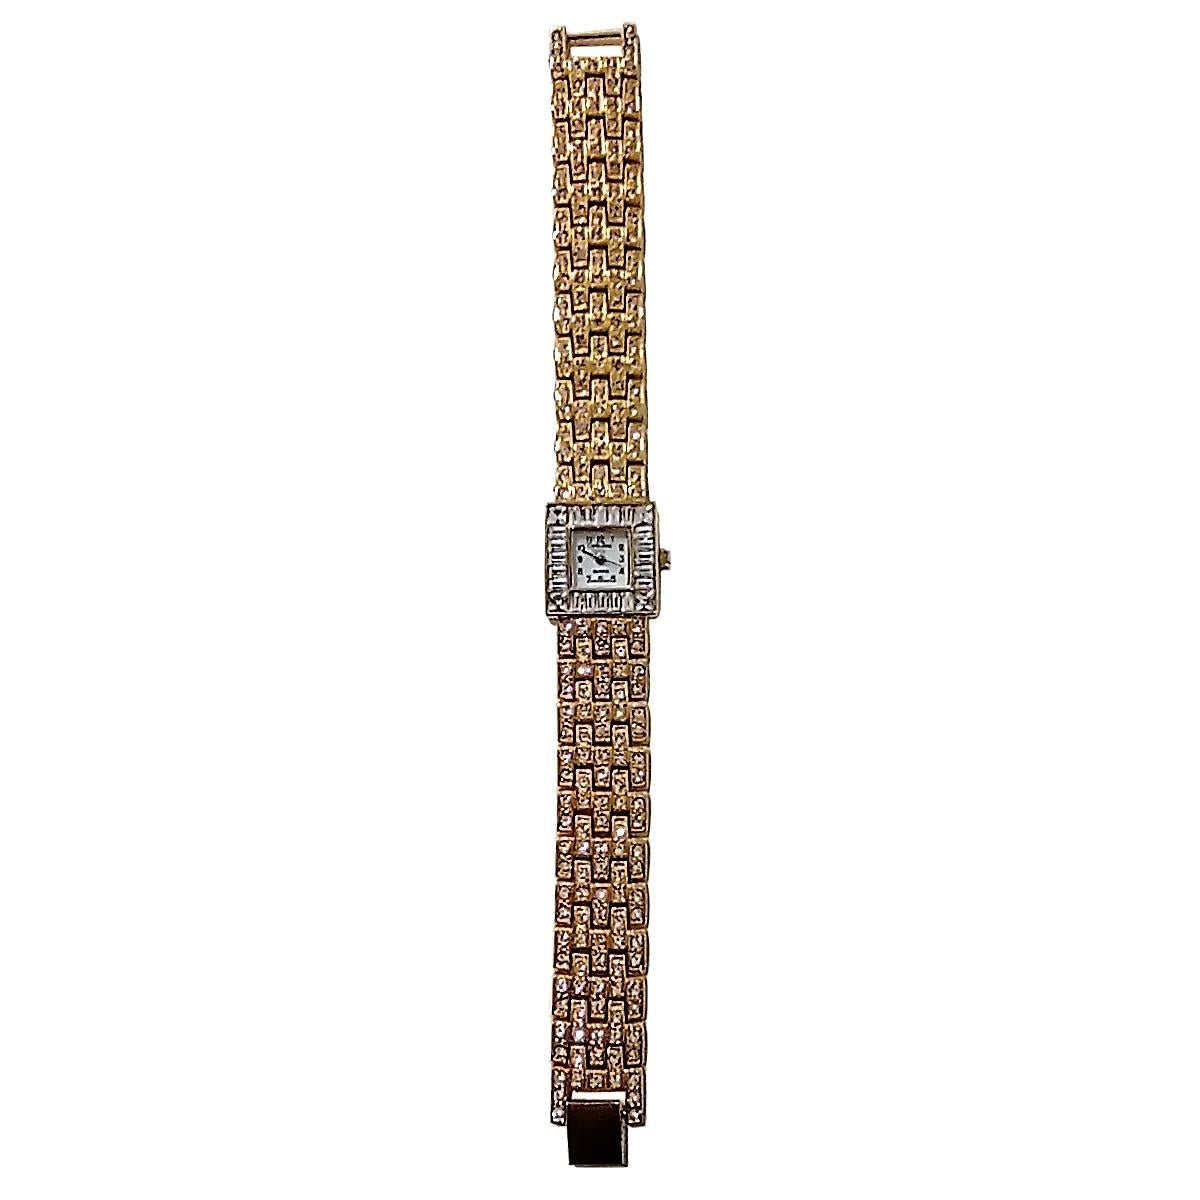 Amazing Carlo Zini Milano jewel watch 
One of the greatest bijoux creators of all times
Vintage from late 80's / early 90's
Perfectly working
Japanese quartz movement
Golden metal strap, 18kt 3 micron gold dipped
Swarovski crystals
Non